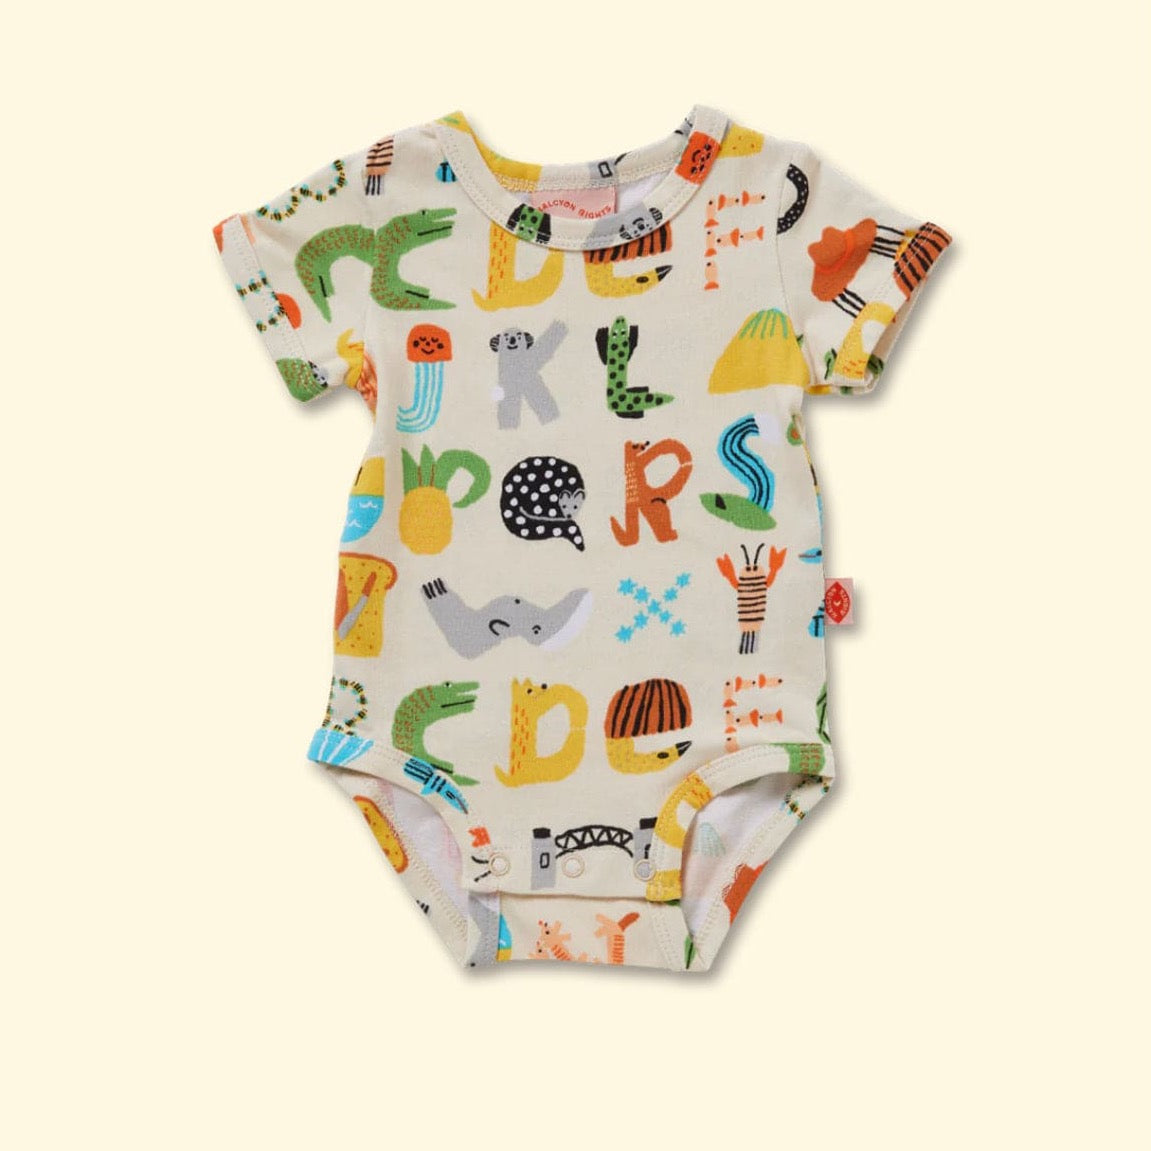 ABC Down Under Short Sleeve Bodysuit by Halcyon Nights